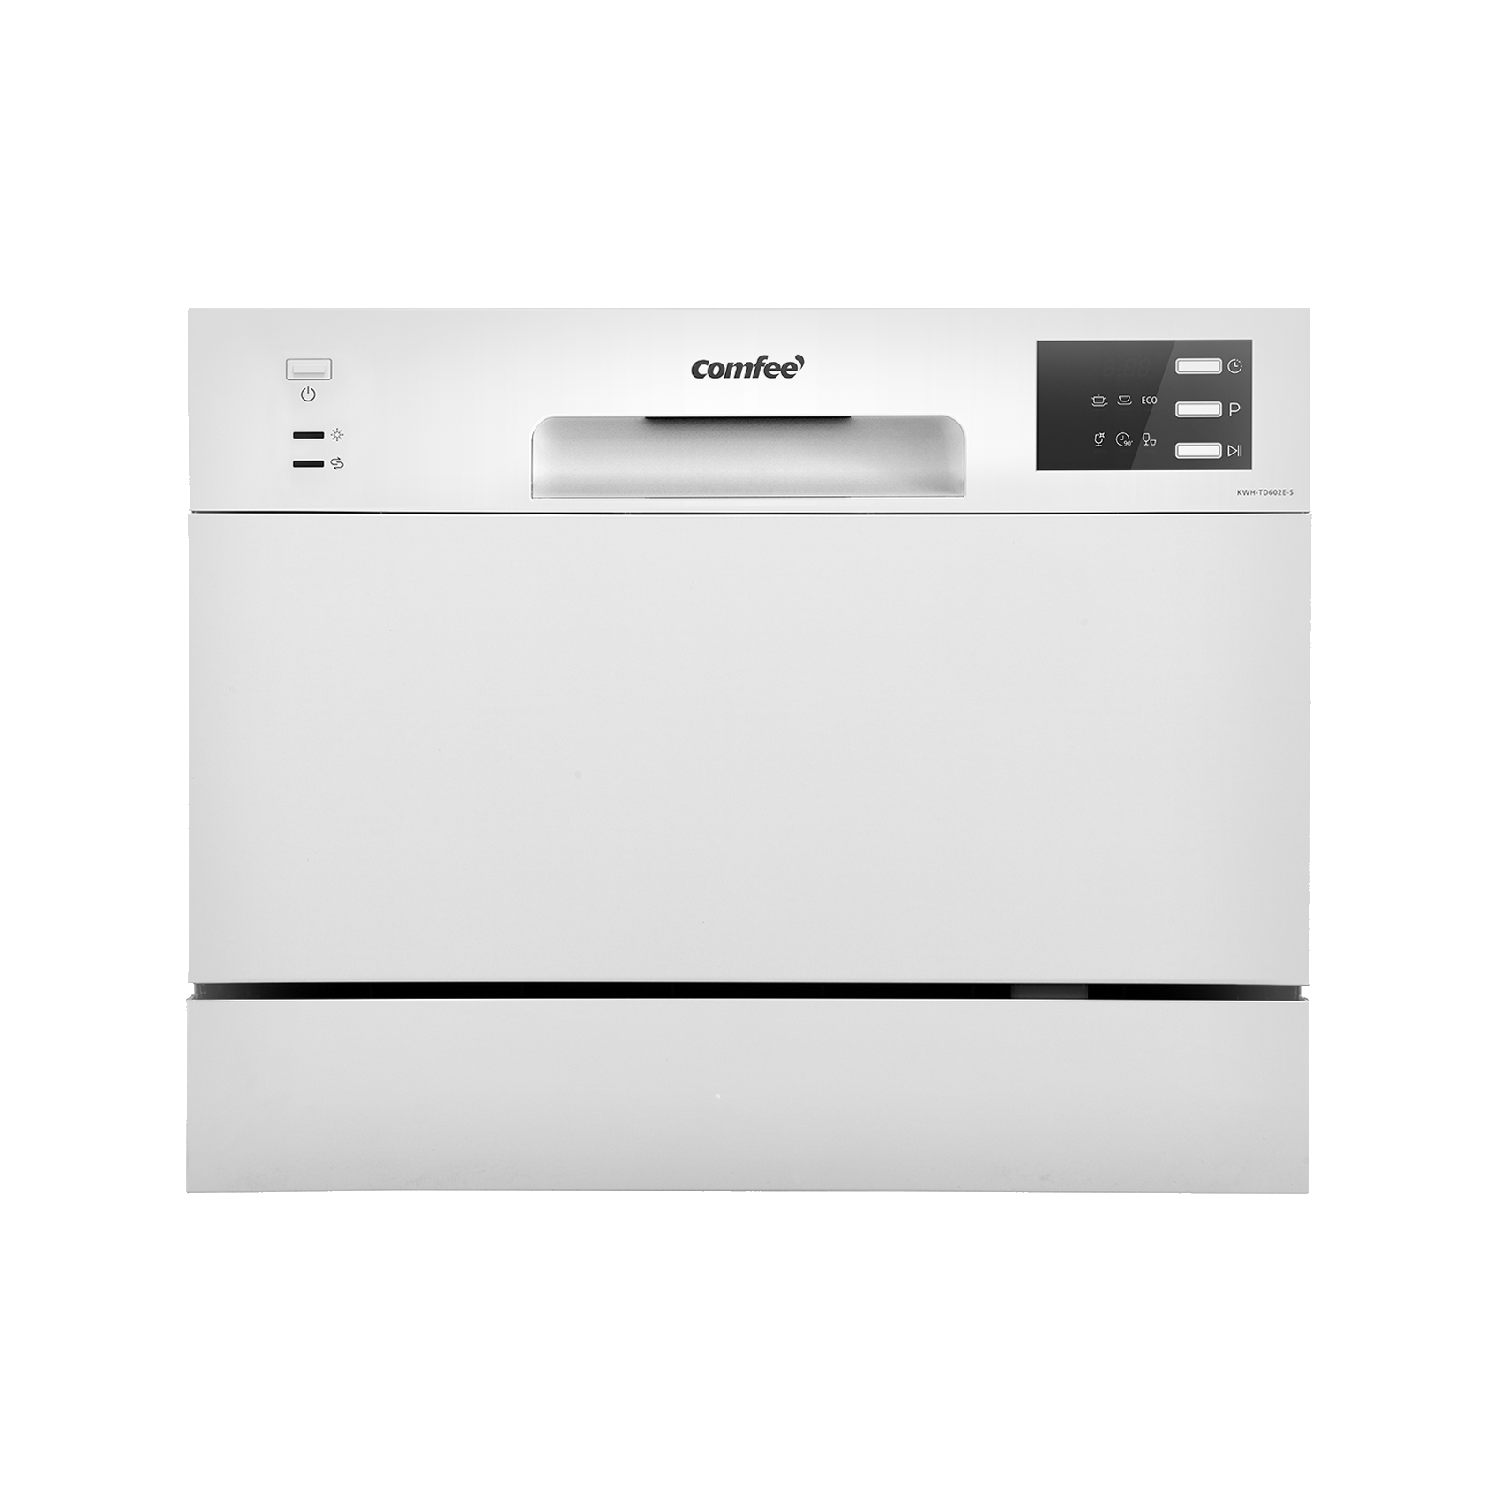 COMFEE' Countertop Dishwasher, Energy Star Portable Dishwasher, 6 Plac –  VARIETY PACKAGES UNLIMITED